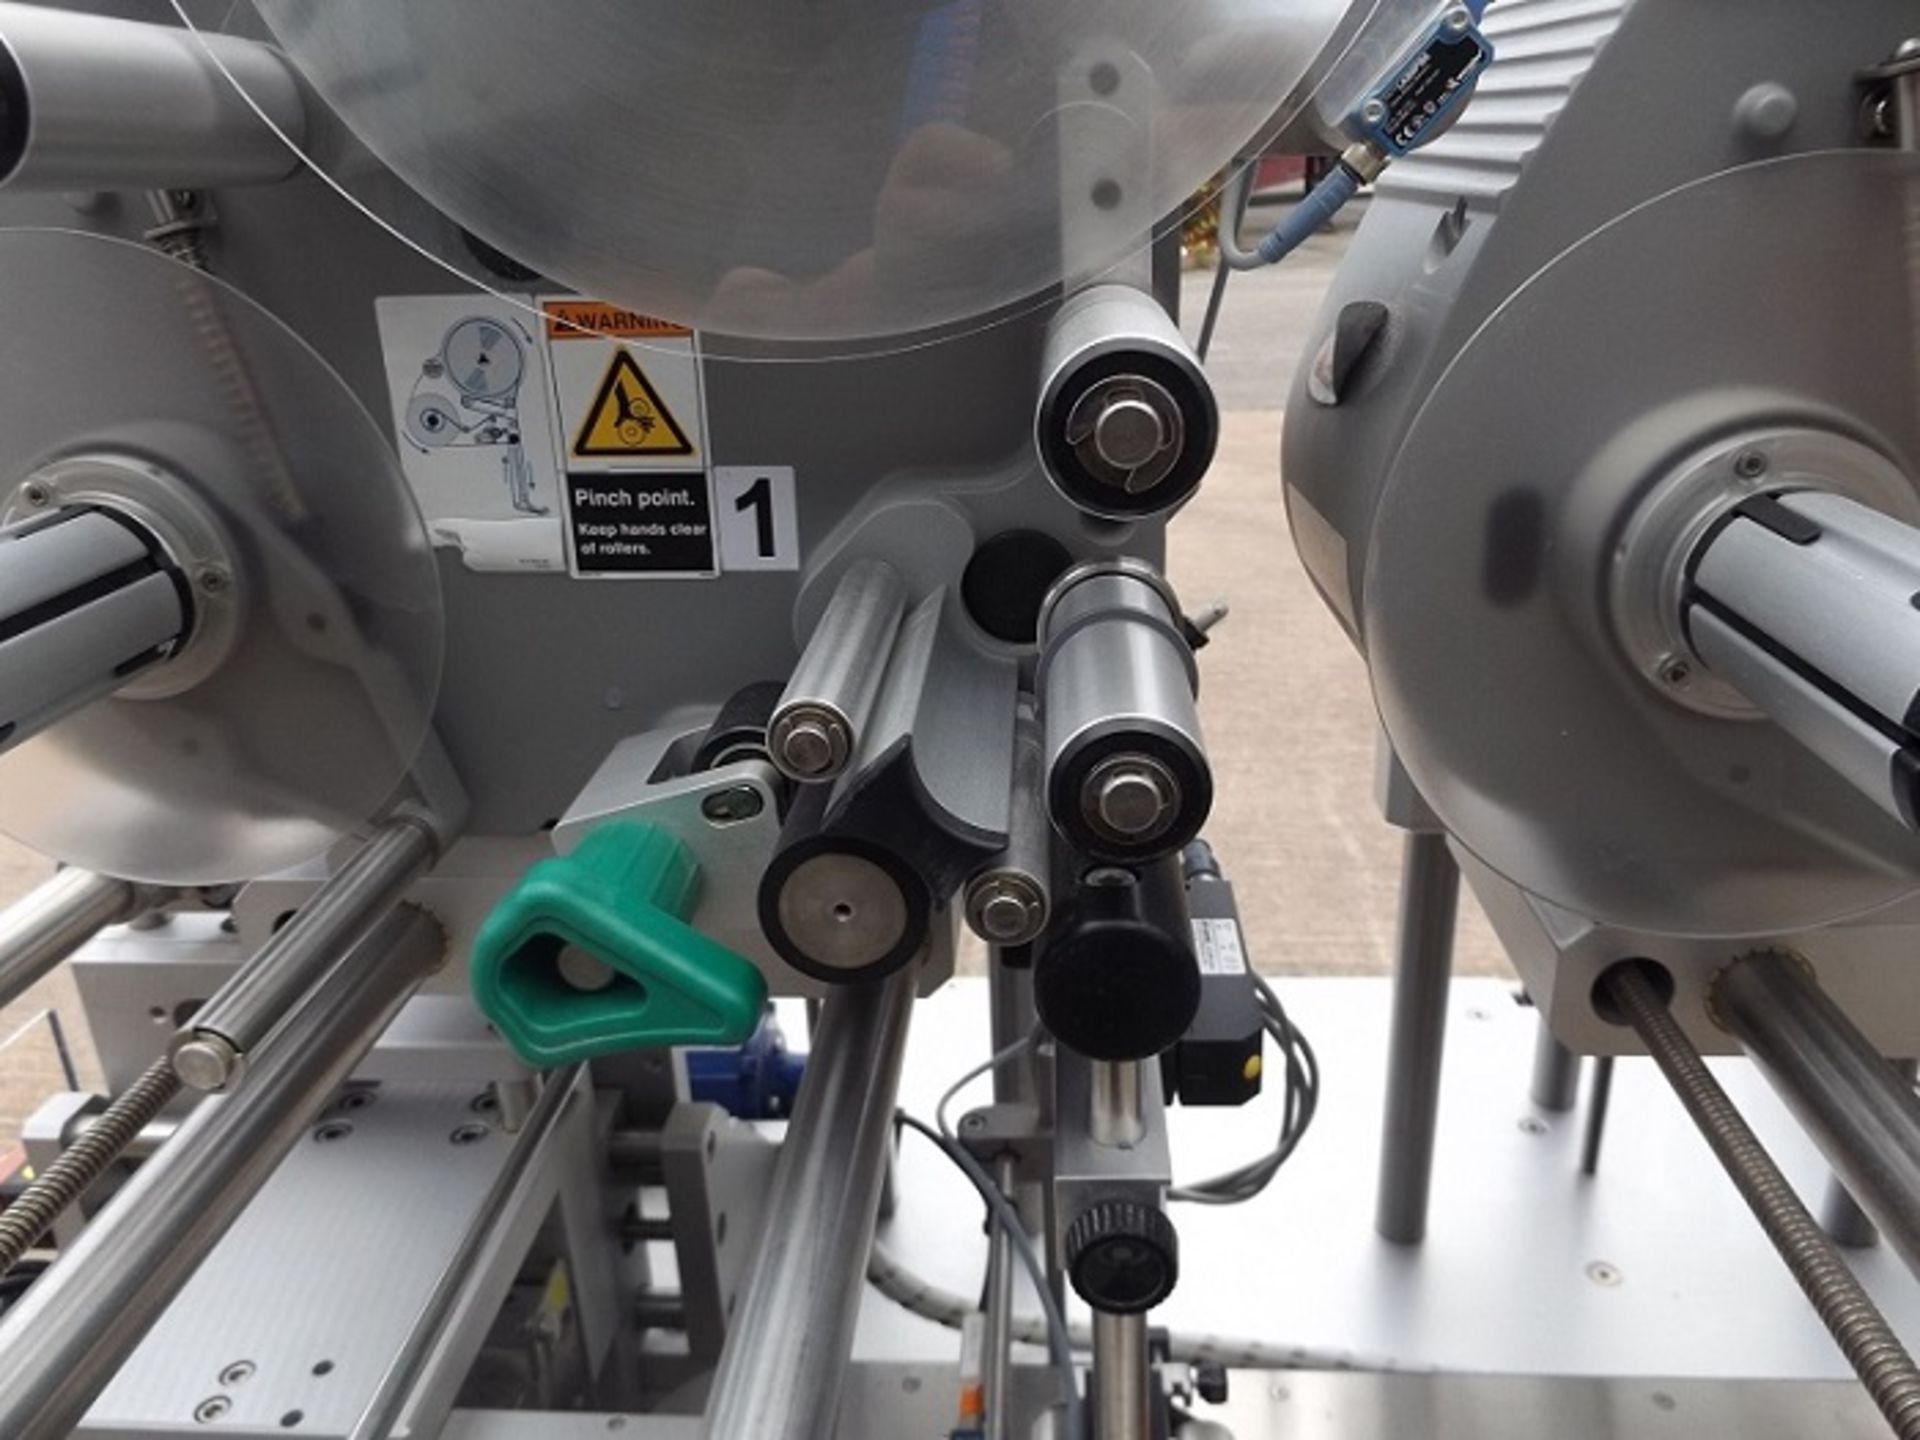 Pauer Tamper Evident/Vignette Labeller. 3 labelling heads: 1 top print and apply with Avery Dennison - Image 9 of 24